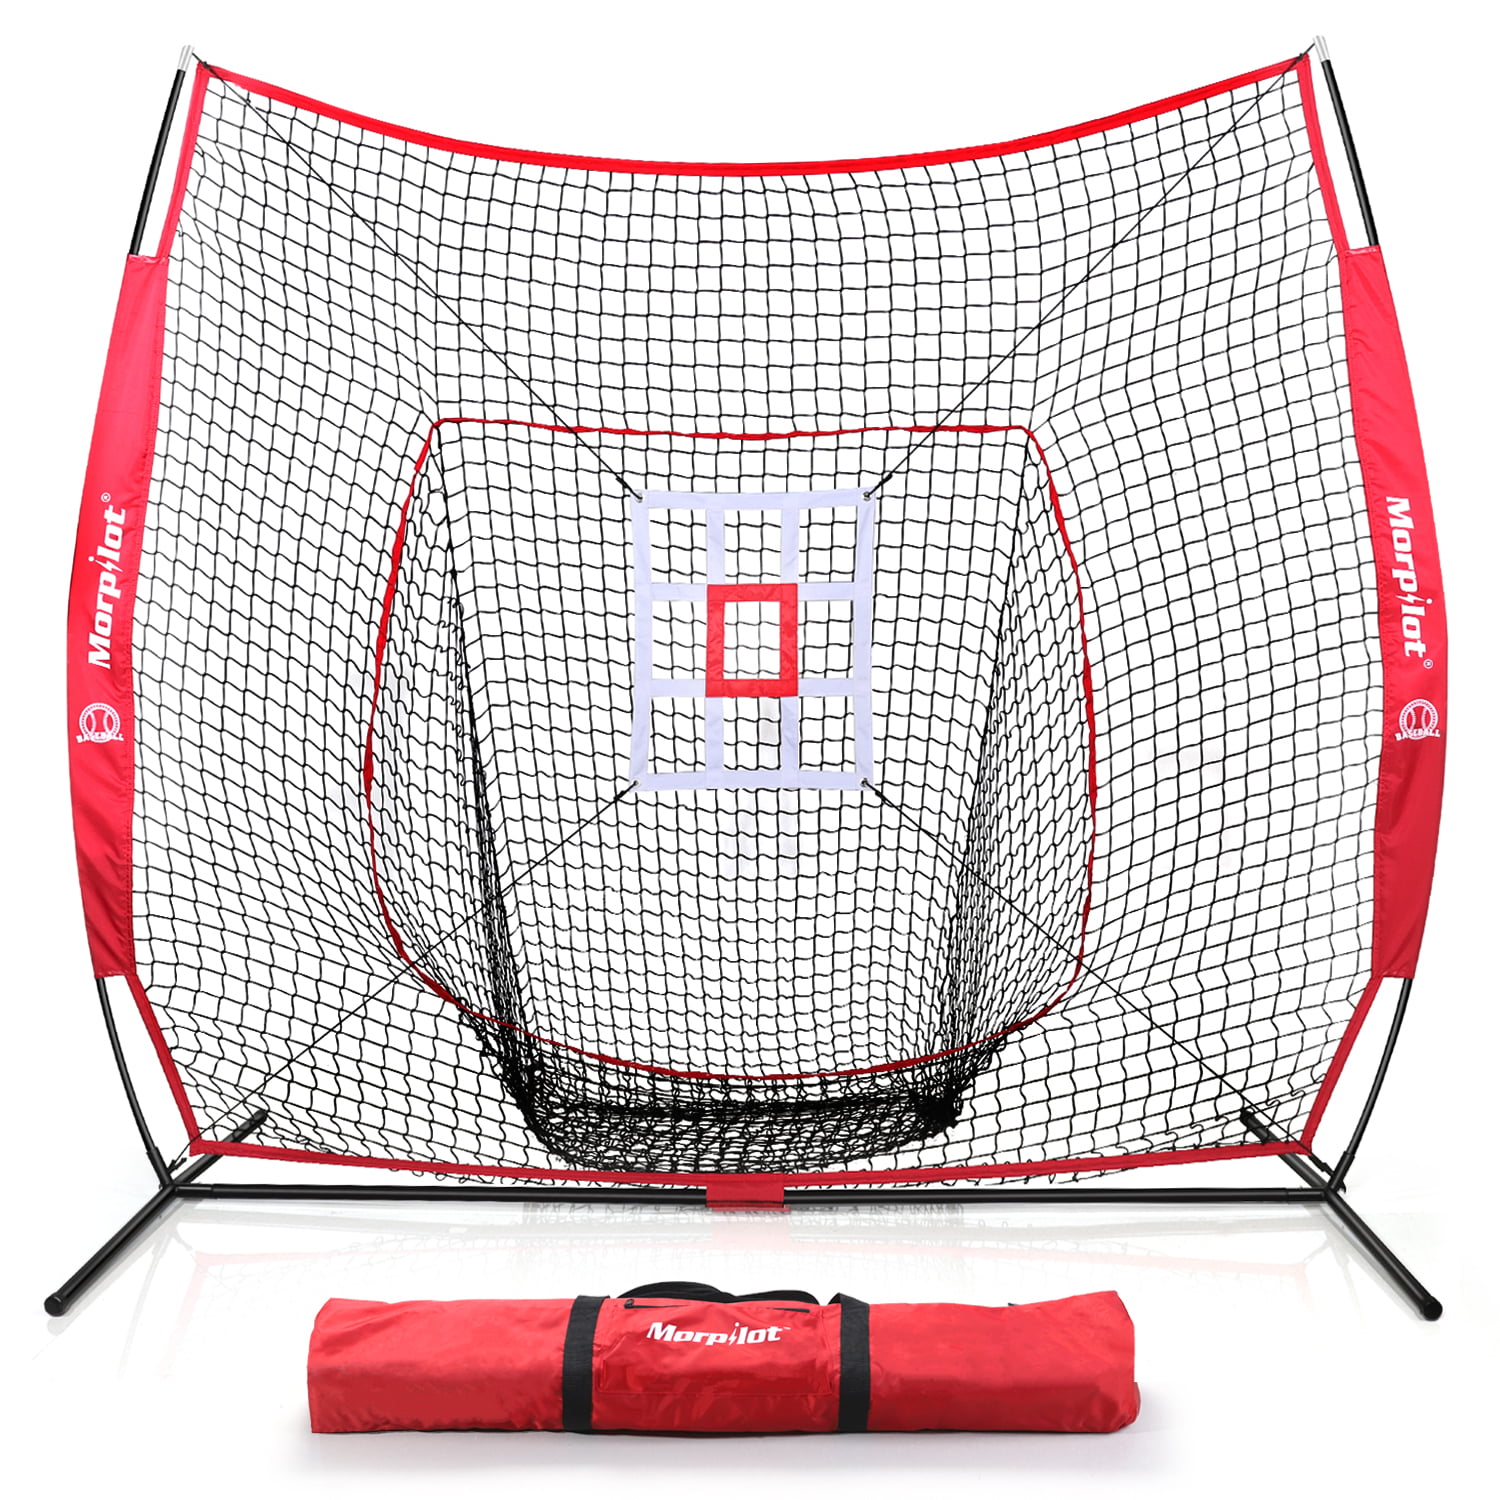 5'x5' Baseball Softball Practice Net Pitching w Strike Zone Target and Carry Bag 